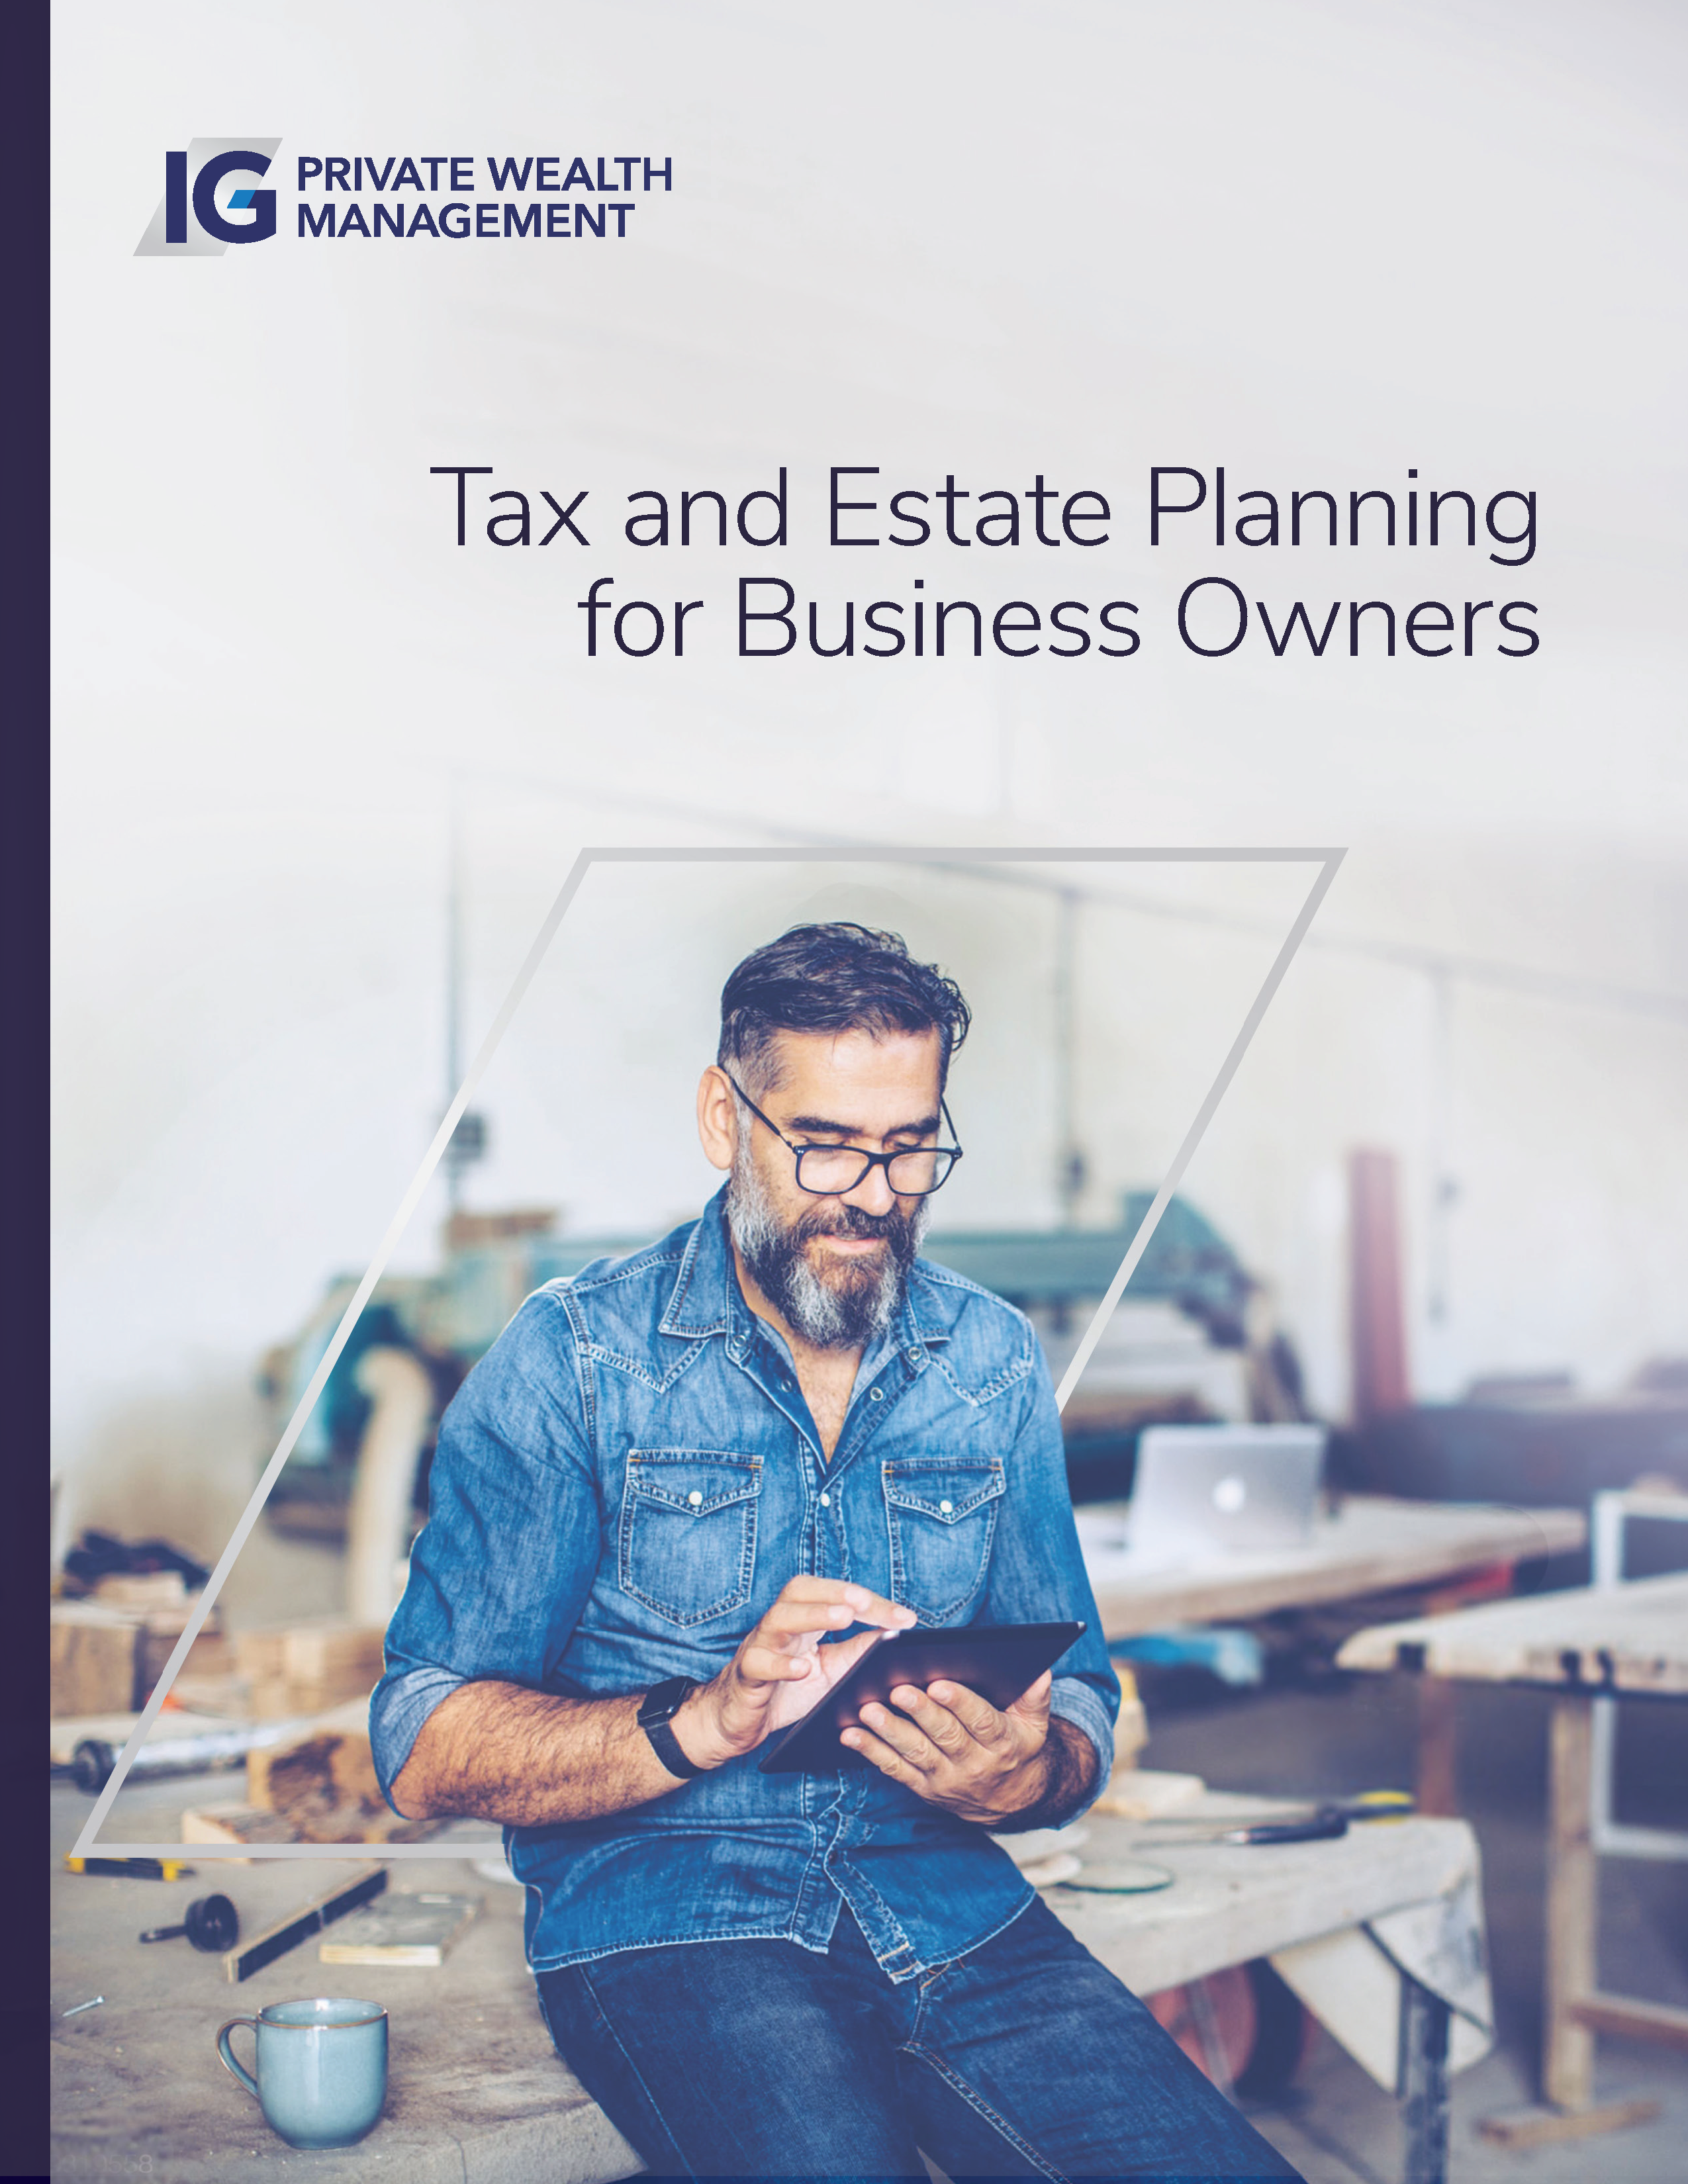 Tax & Estate Planning for Business Owners